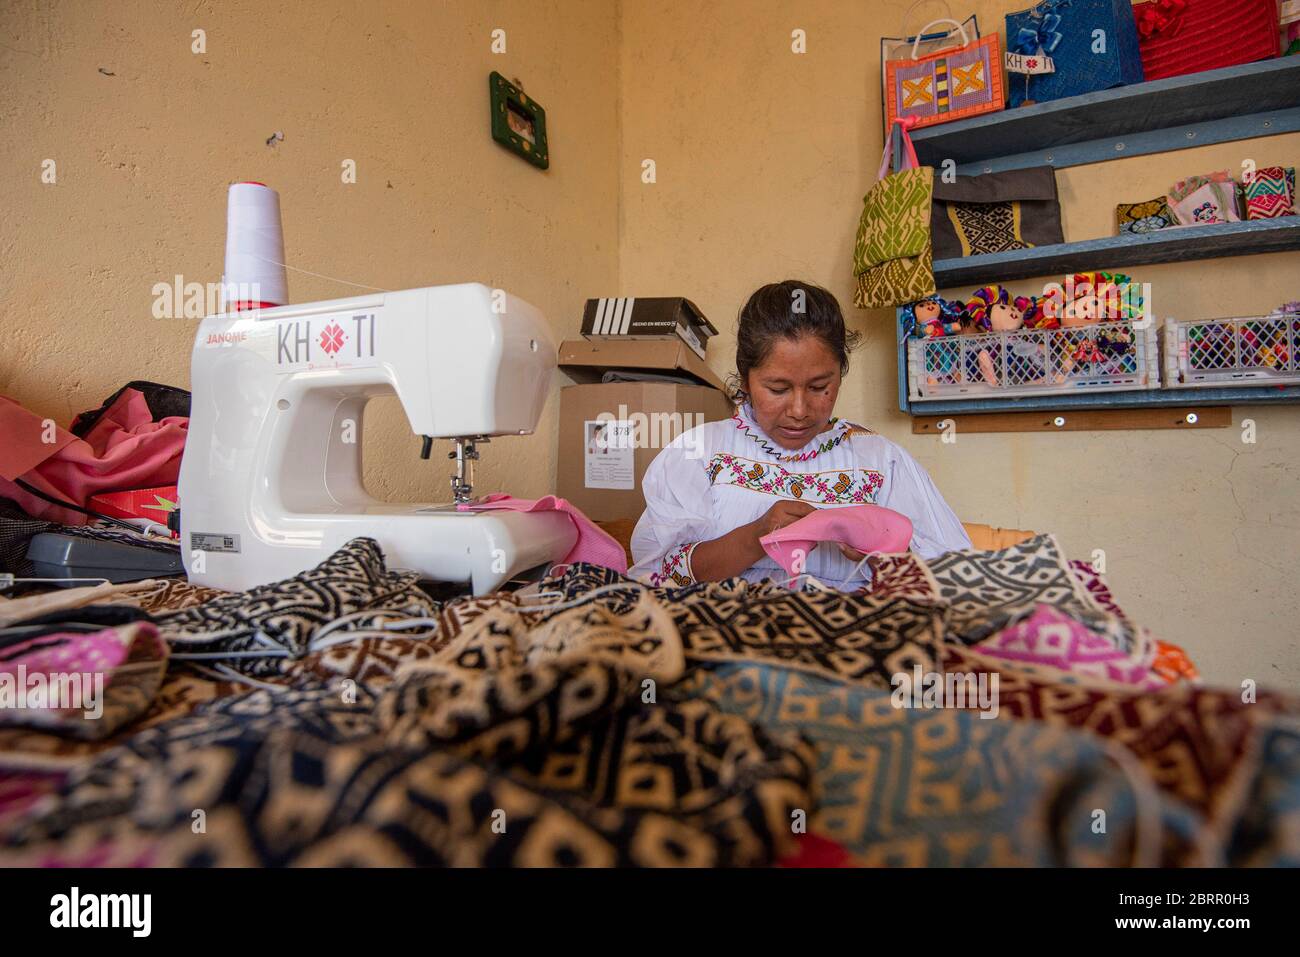 A worker makes re-usable face masks at their office during the coronavirus crisis.About 20 Otomi women from the community of San Idelfonso, in the municipality of Amealco Qro, have changed the direction of their business to face of the Covid-19 pandemic, before this they were dedicated to making handcrafted napkins and dolls and now, due to the Coronavirus crisis, their direction has changed to making handcrafted mouth covers, all with the theme that represents them as an indigenous people of the state. Stock Photo